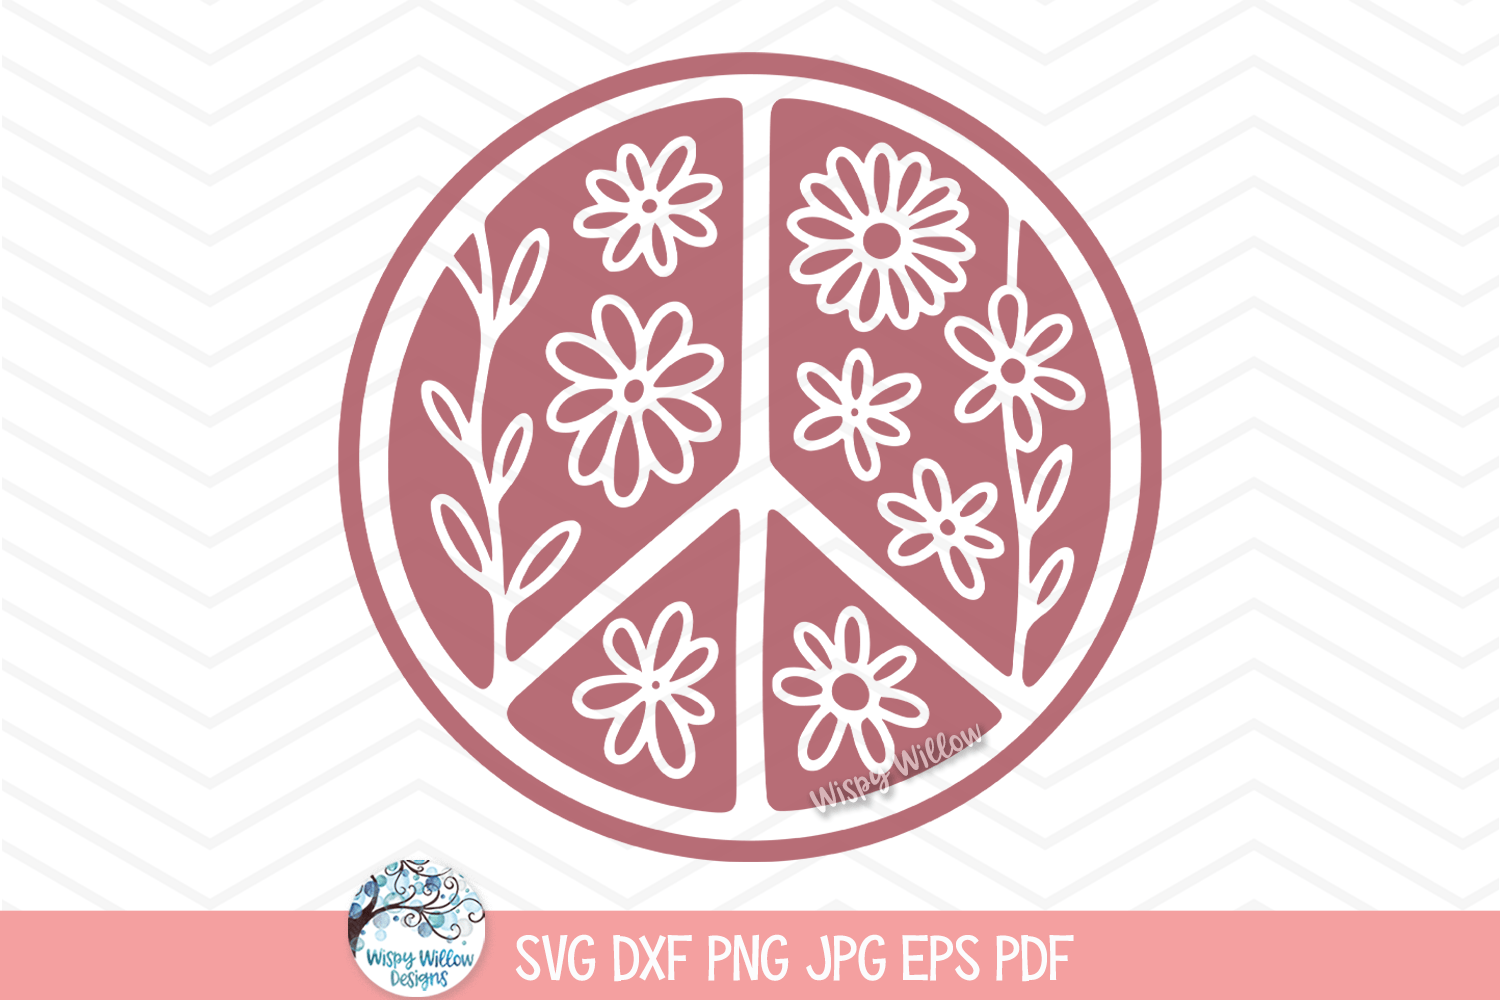 Peace Sign Flowers SVG | Monochromatic Color Floral Peace Symbol Wispy Willow Designs Company